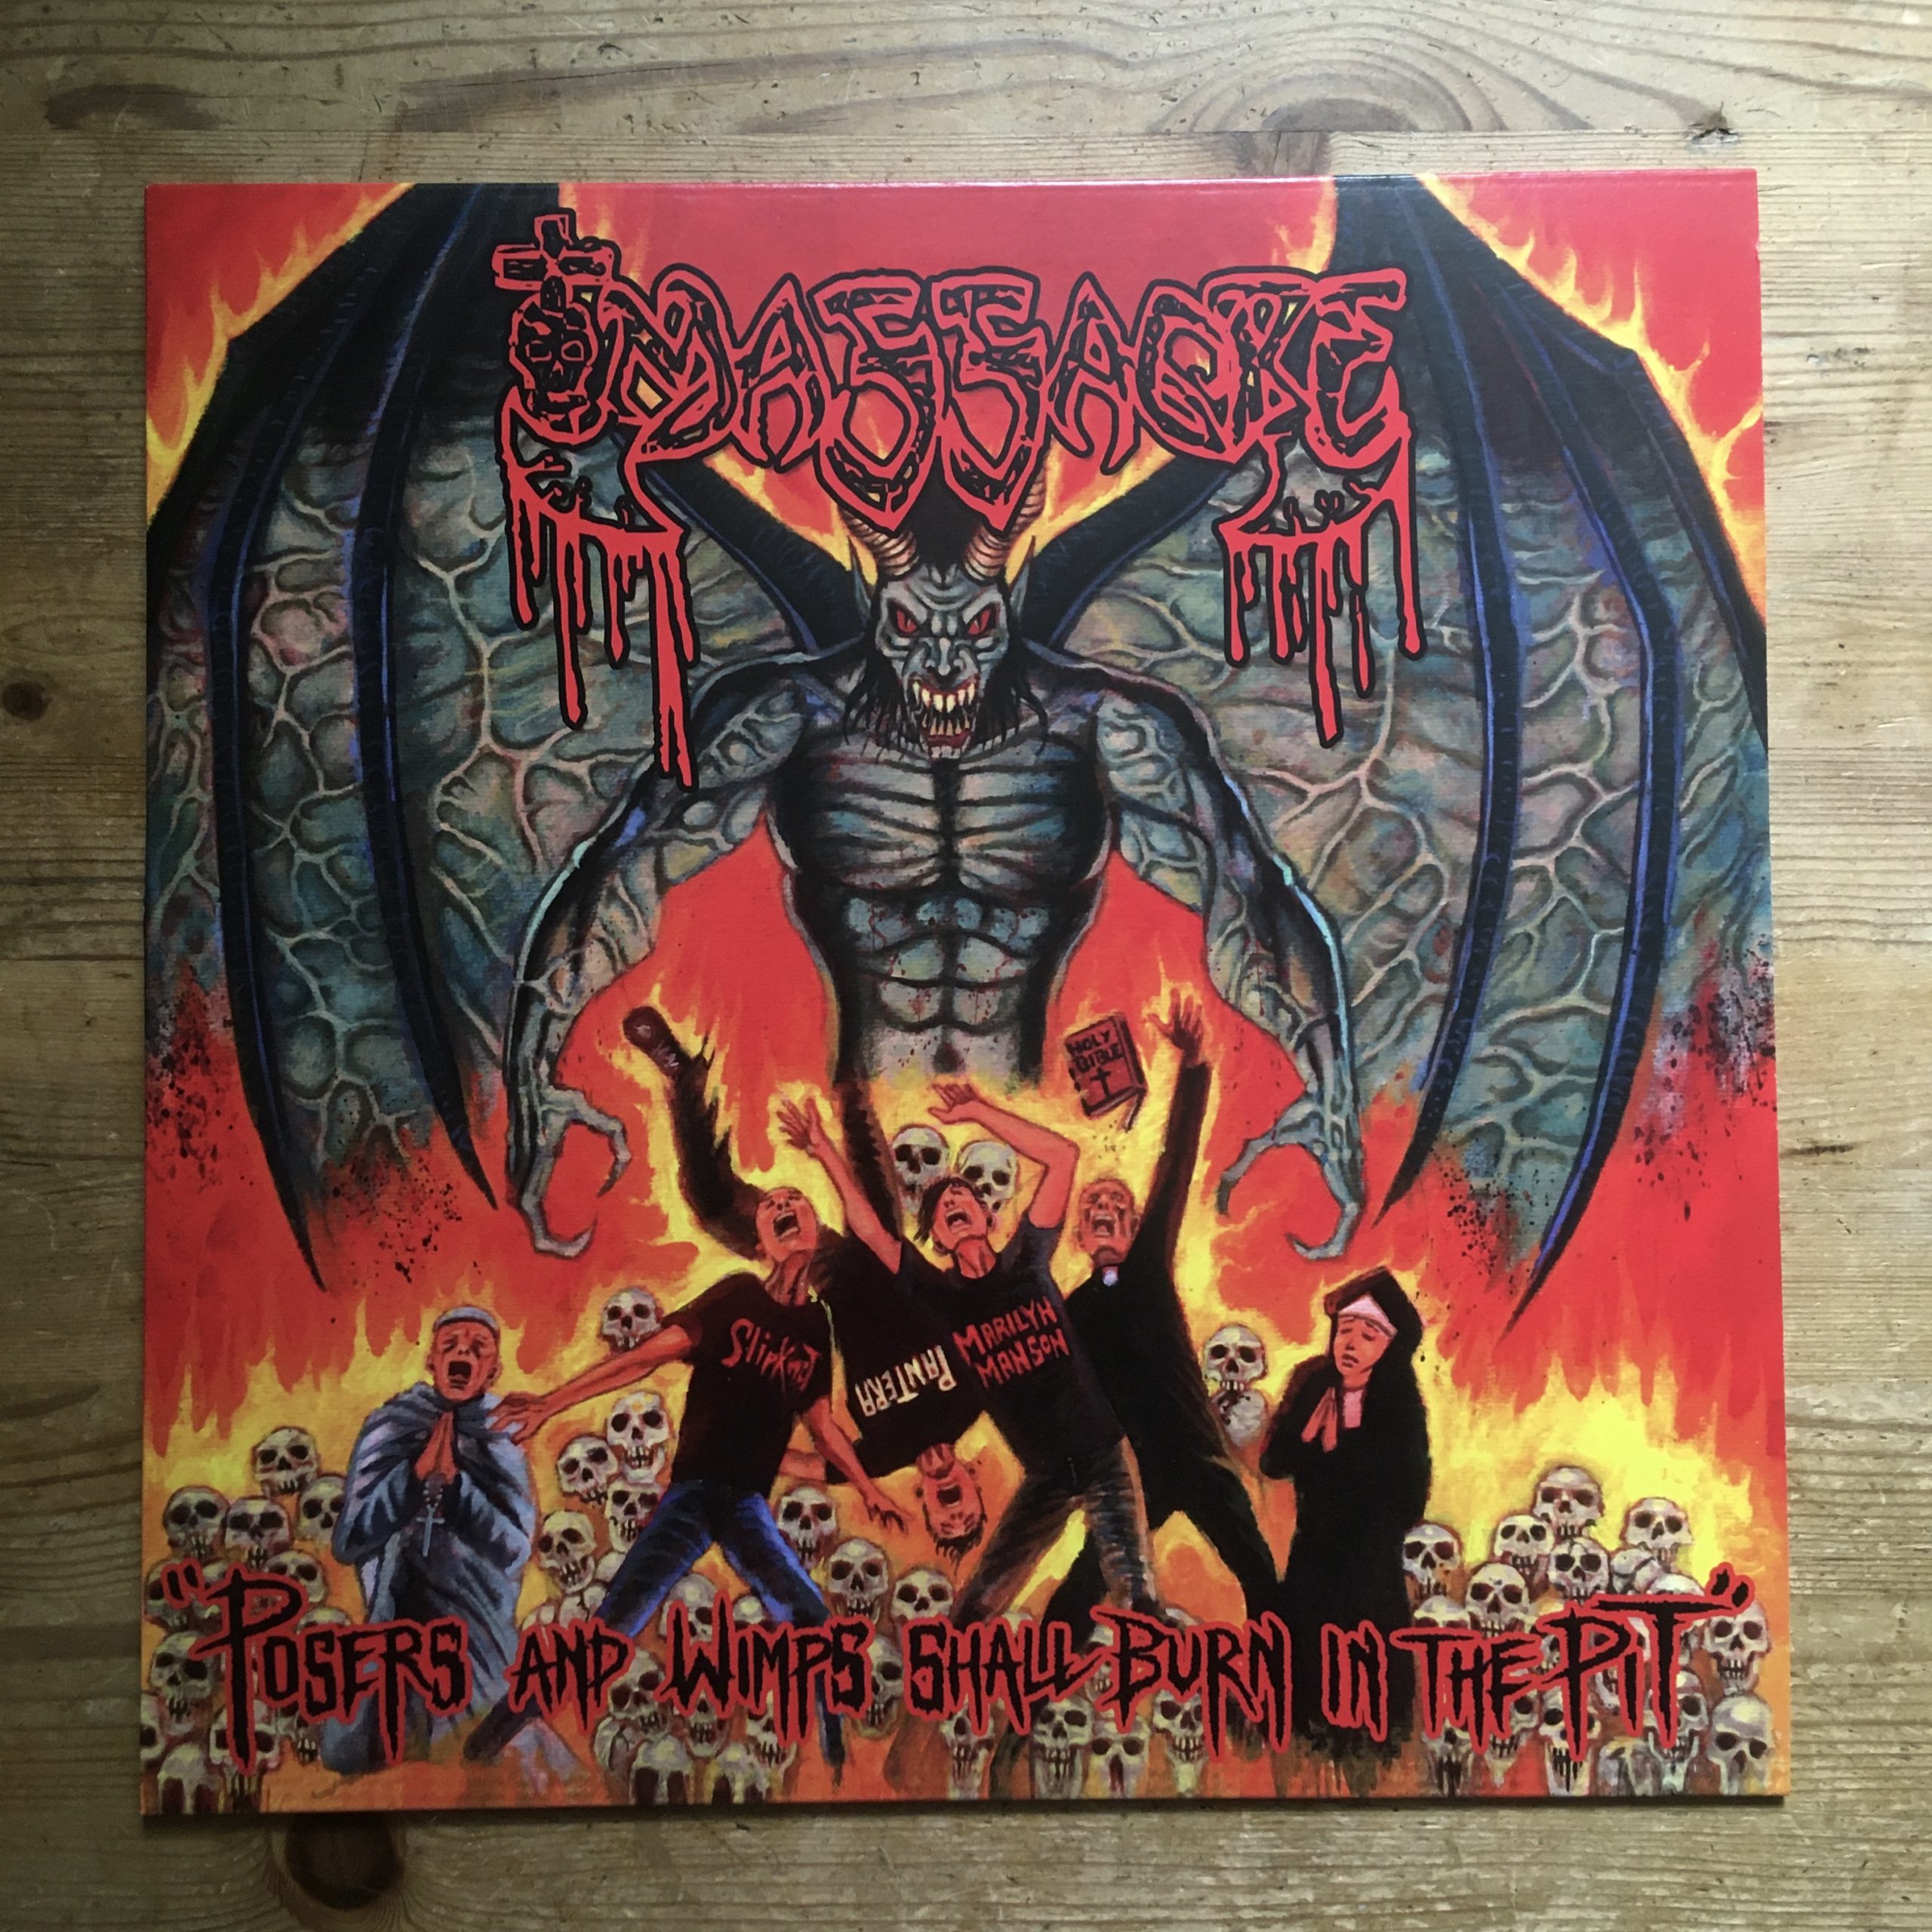 Photo of the Massacre - "Posers and Wimps shall Burn in the pit" 2LP (Orange vinyl)